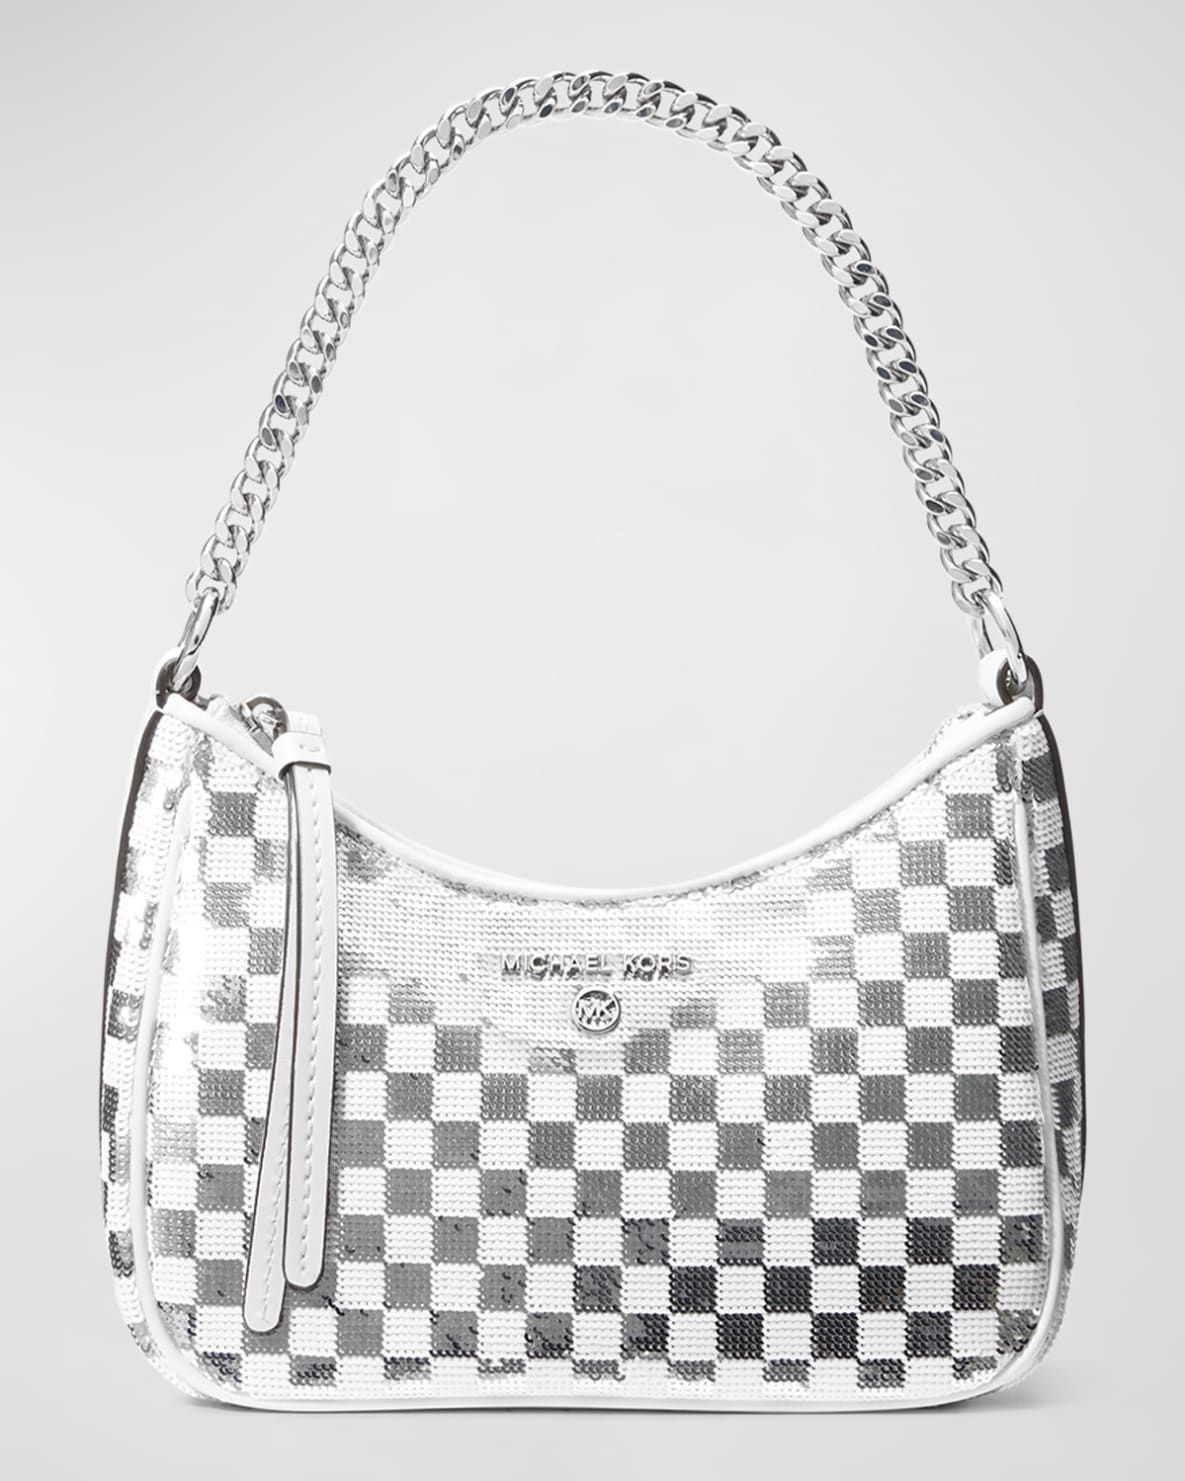 MICHAEL KORS JET SET CHARM SEQUINED CHECKERBOARD SMALL CLUTCH